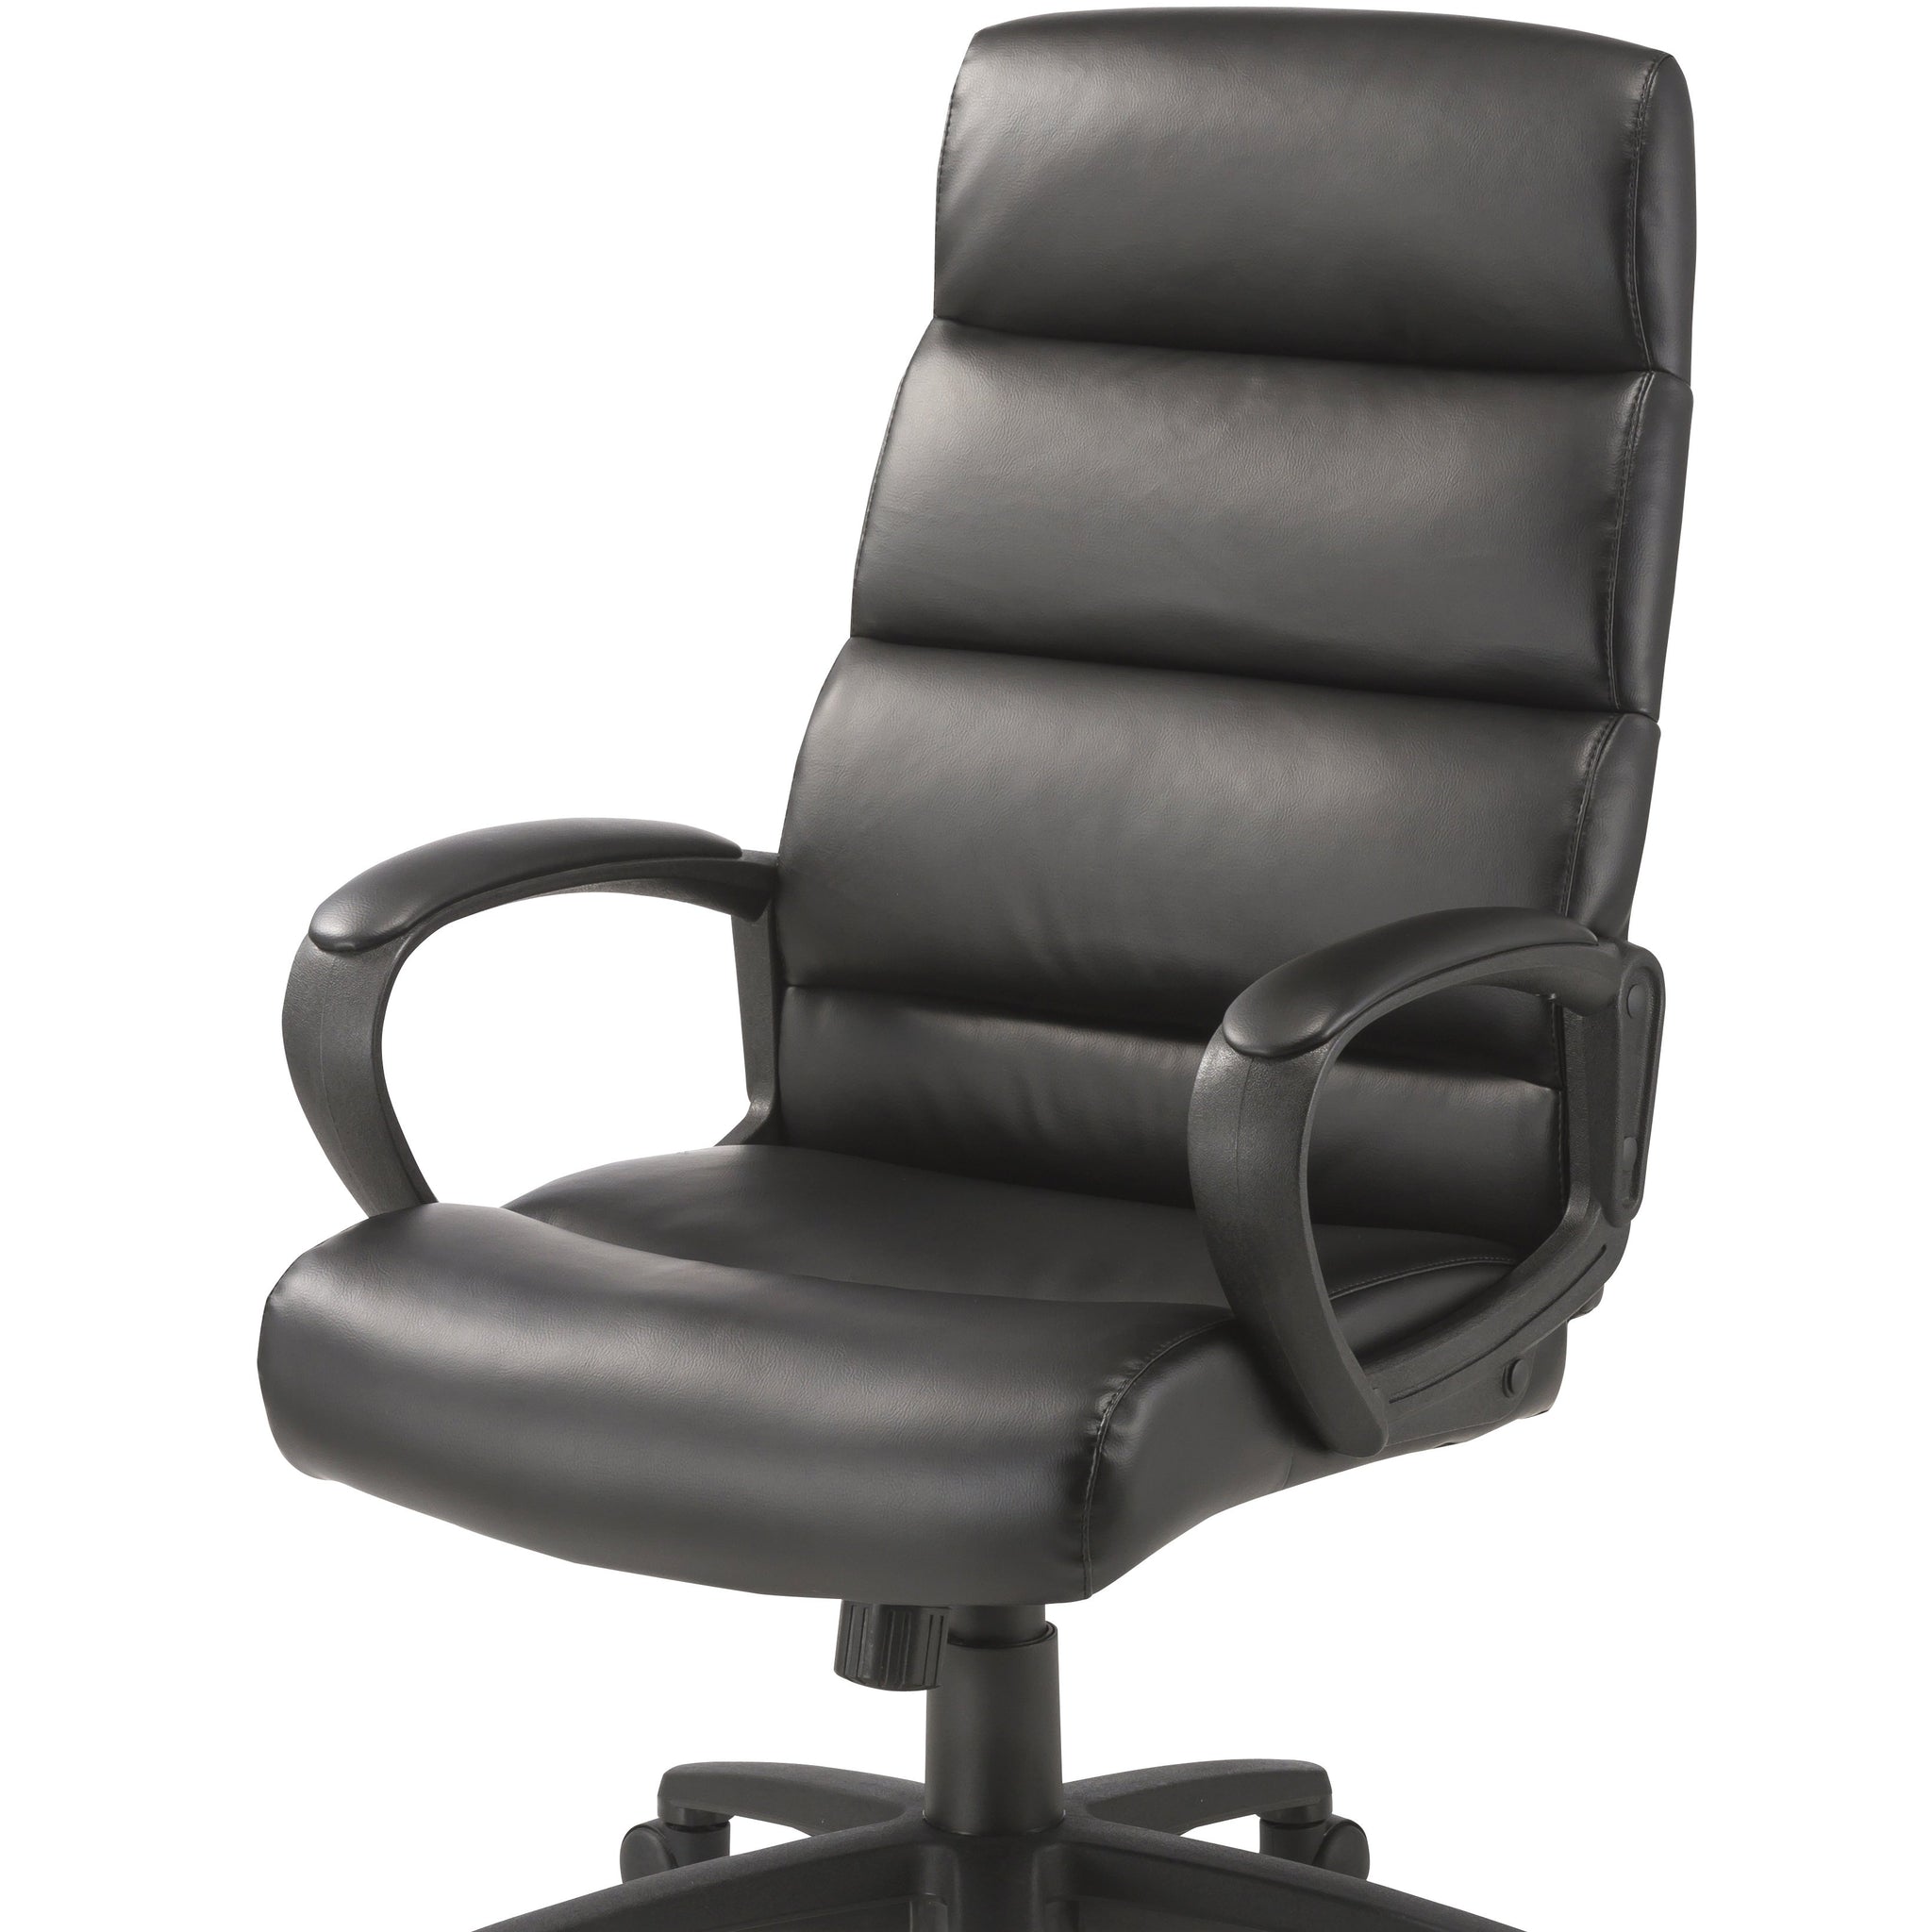 Layla - High Back Office Chair - Black